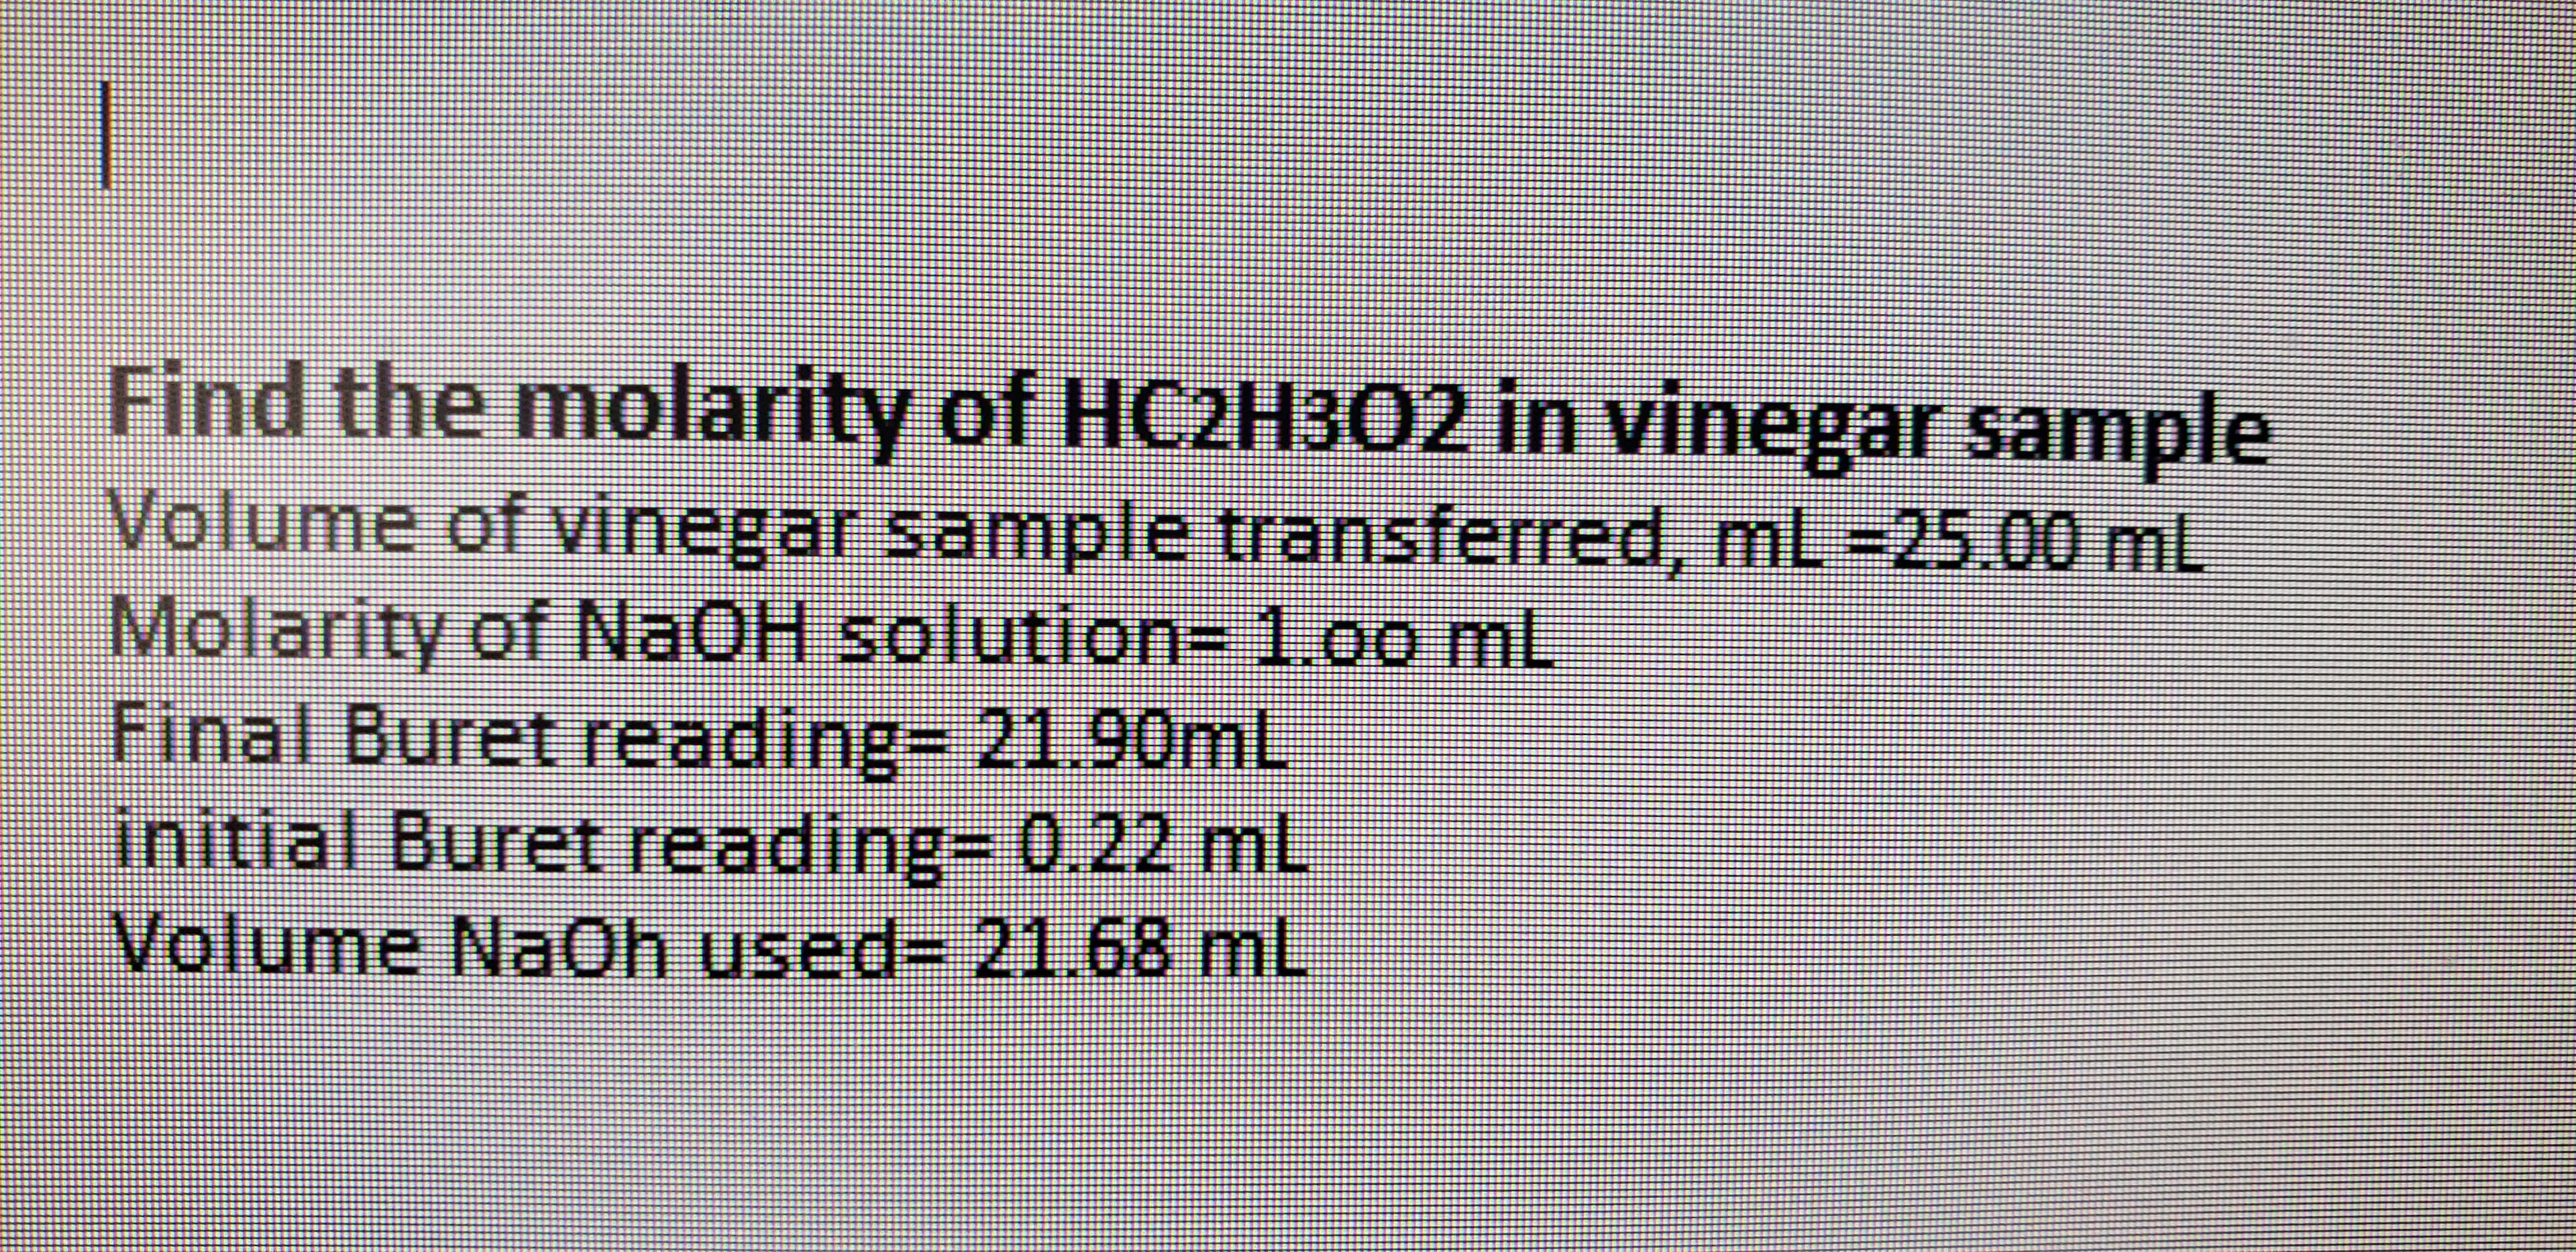 Find the molarity of HC2H302 in vinegar s
Volume N:Oh used- 21.68 ml
